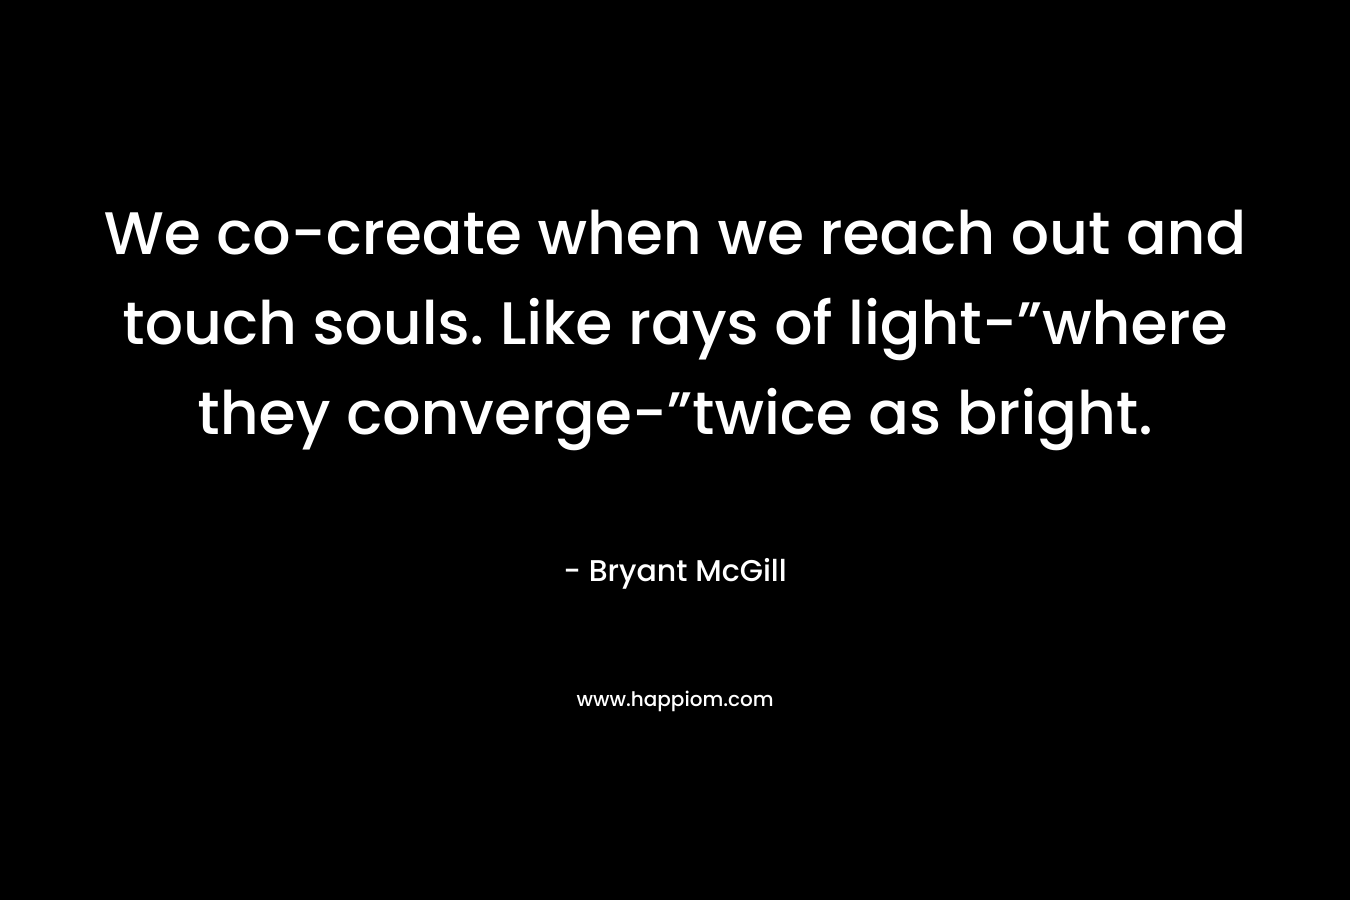 We co-create when we reach out and touch souls. Like rays of light-”where they converge-”twice as bright. – Bryant McGill